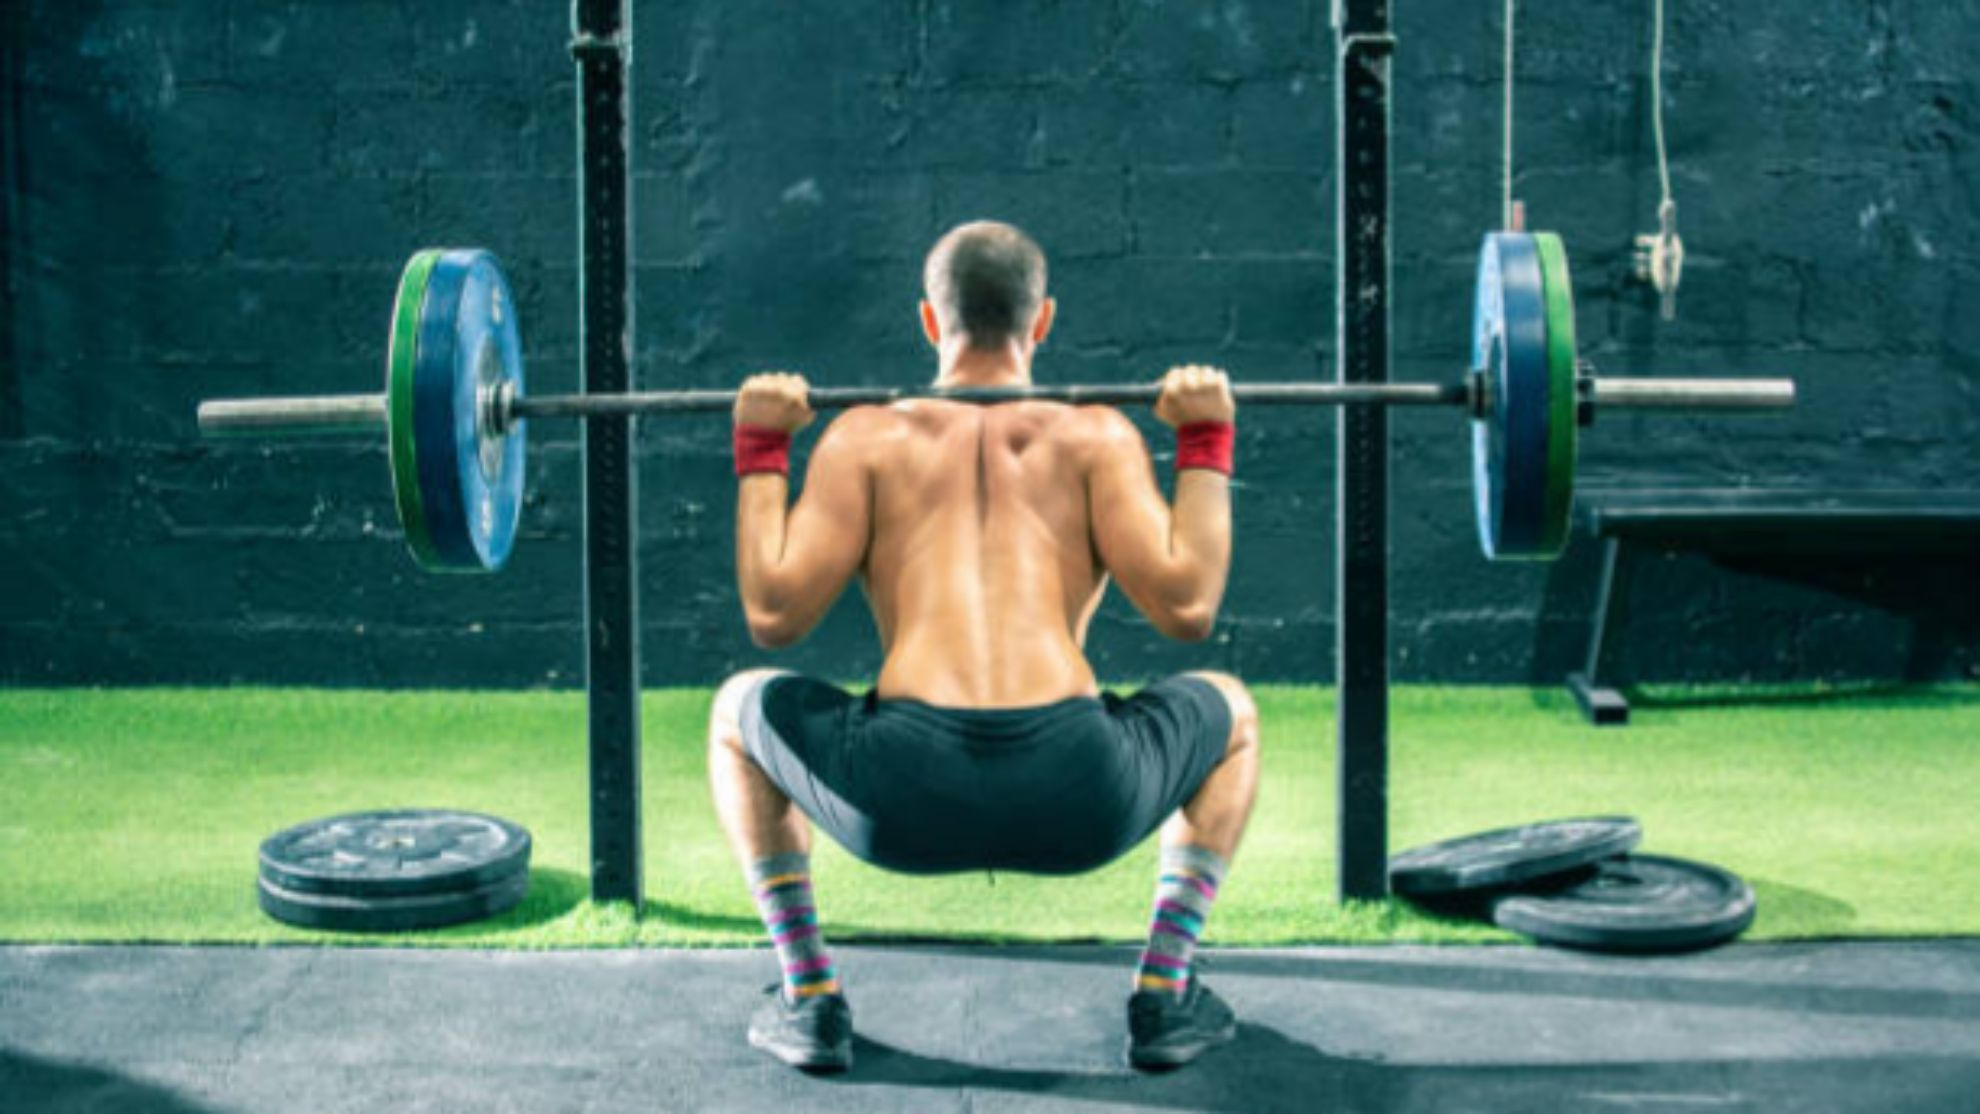 compound exercises, knees bent, sets and reps